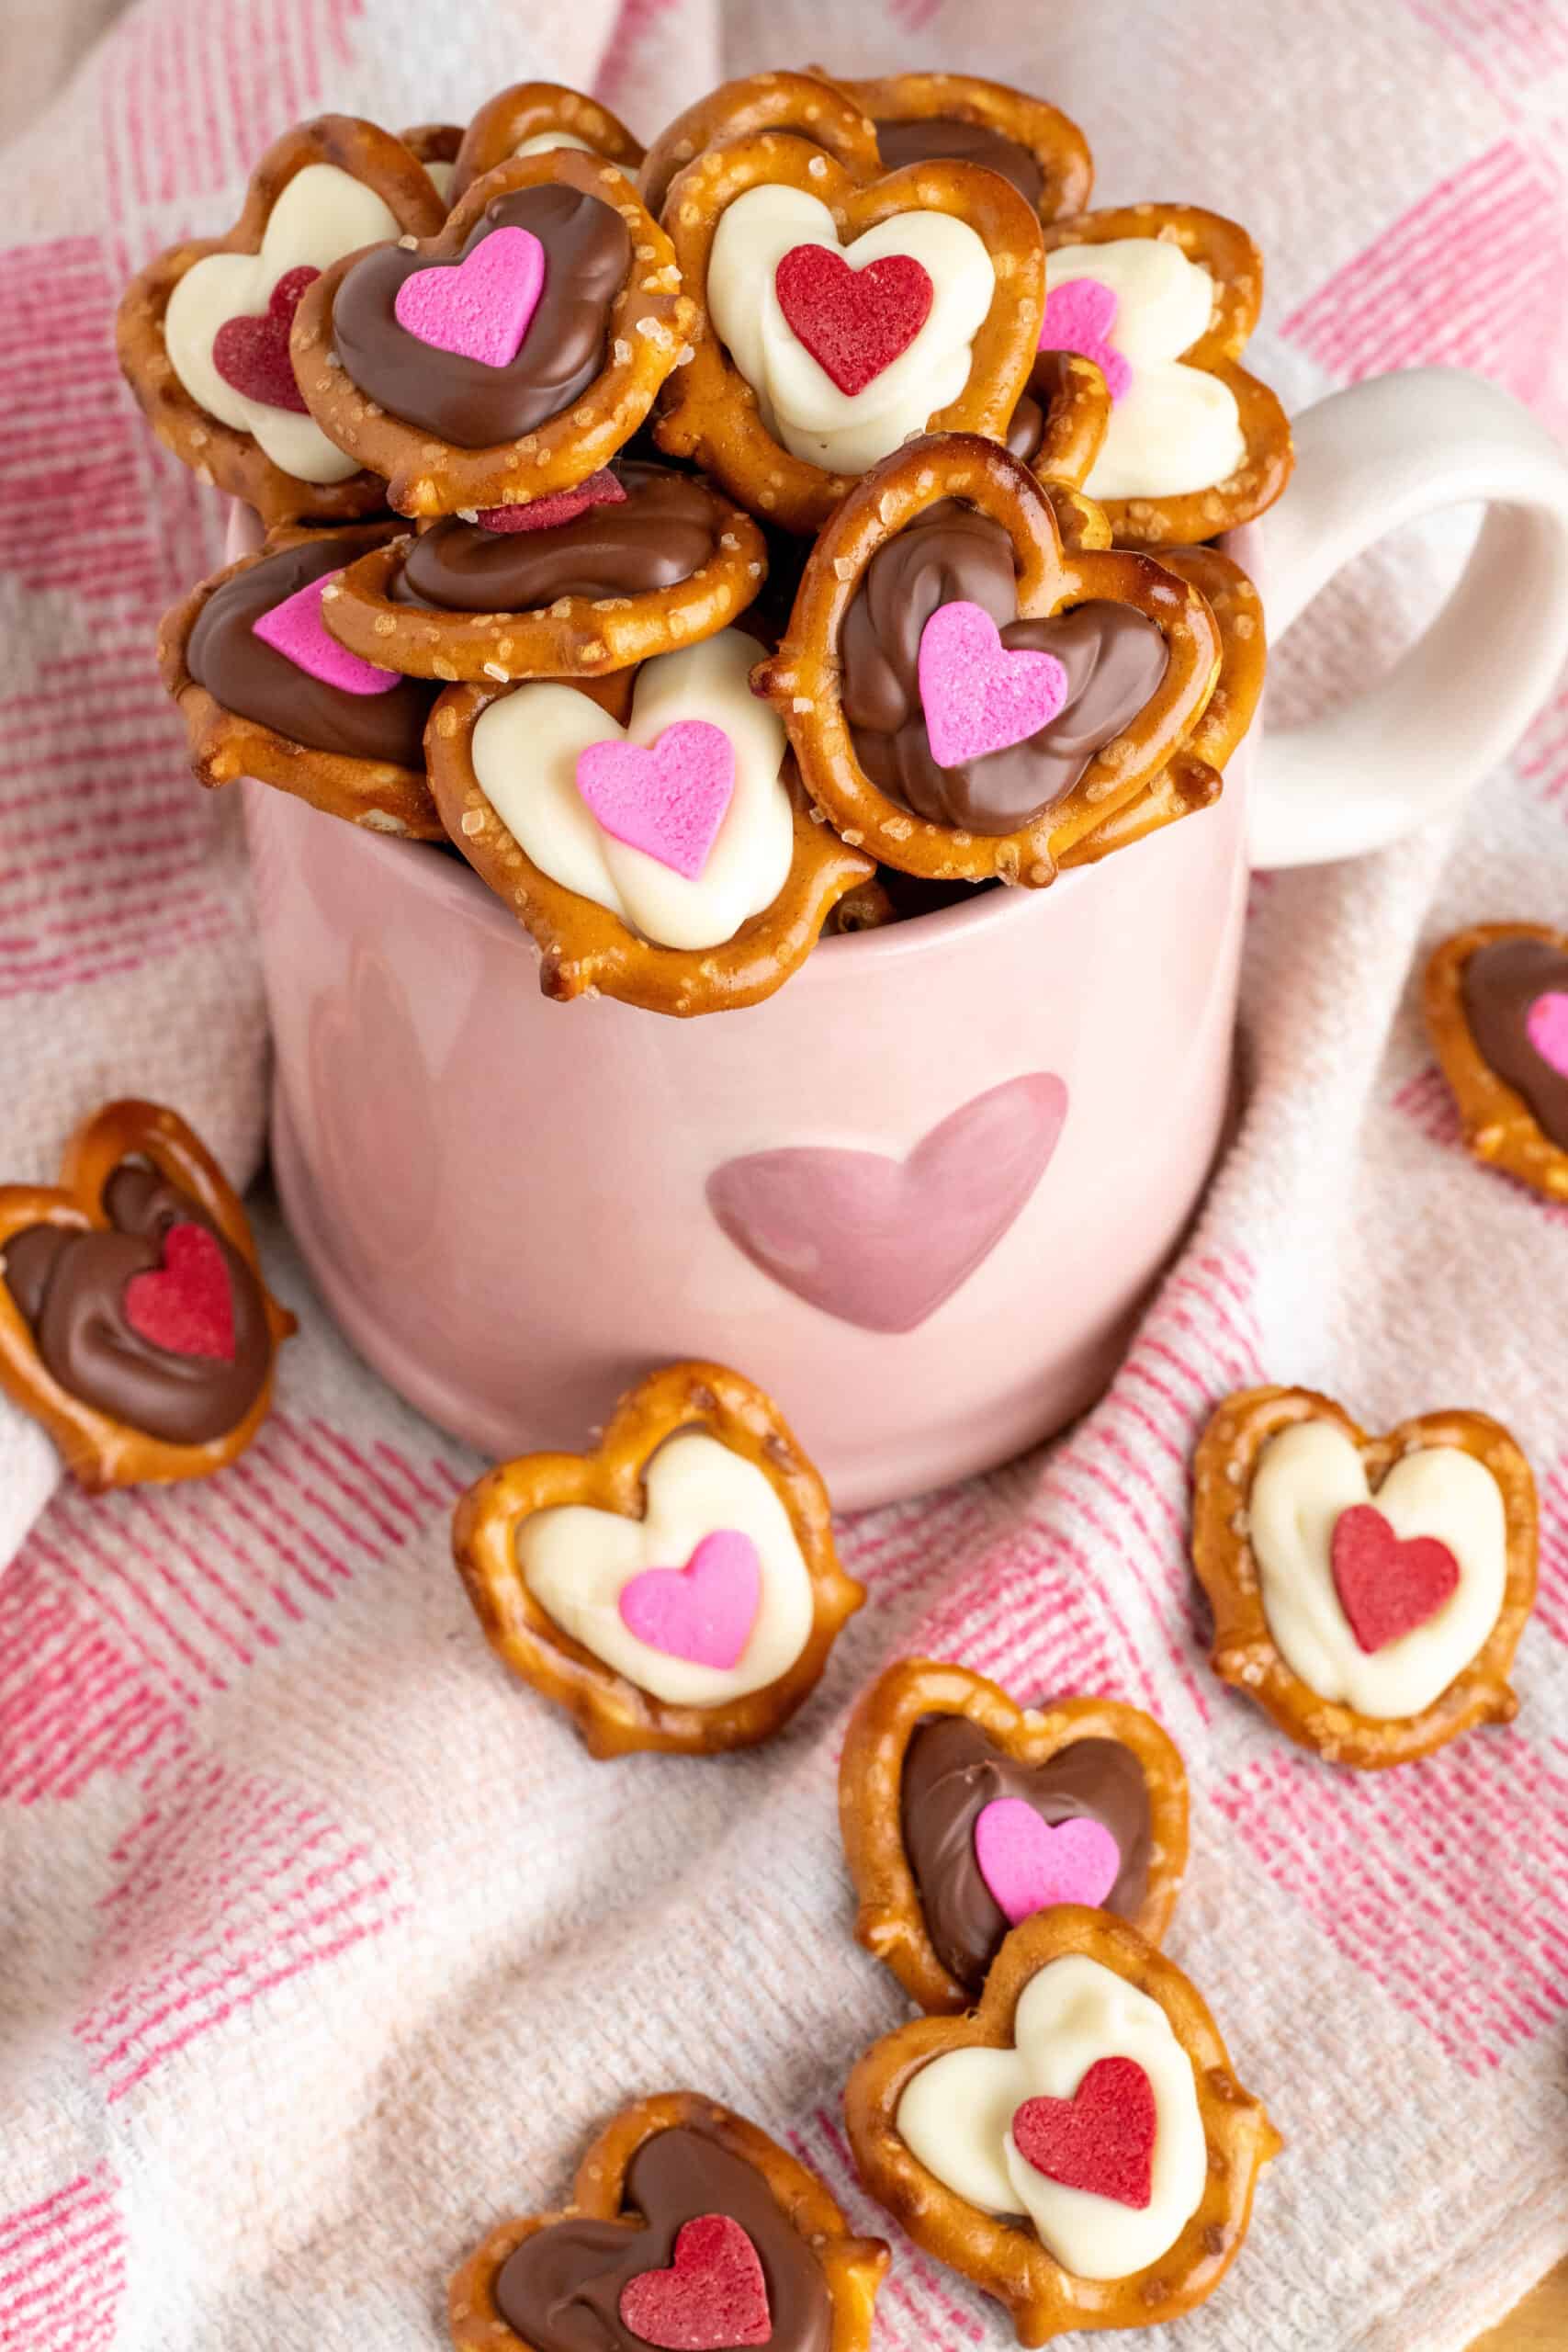 Chocolate Heart Pretzels Are The Perfect Sweet and Salty Valentine Treat